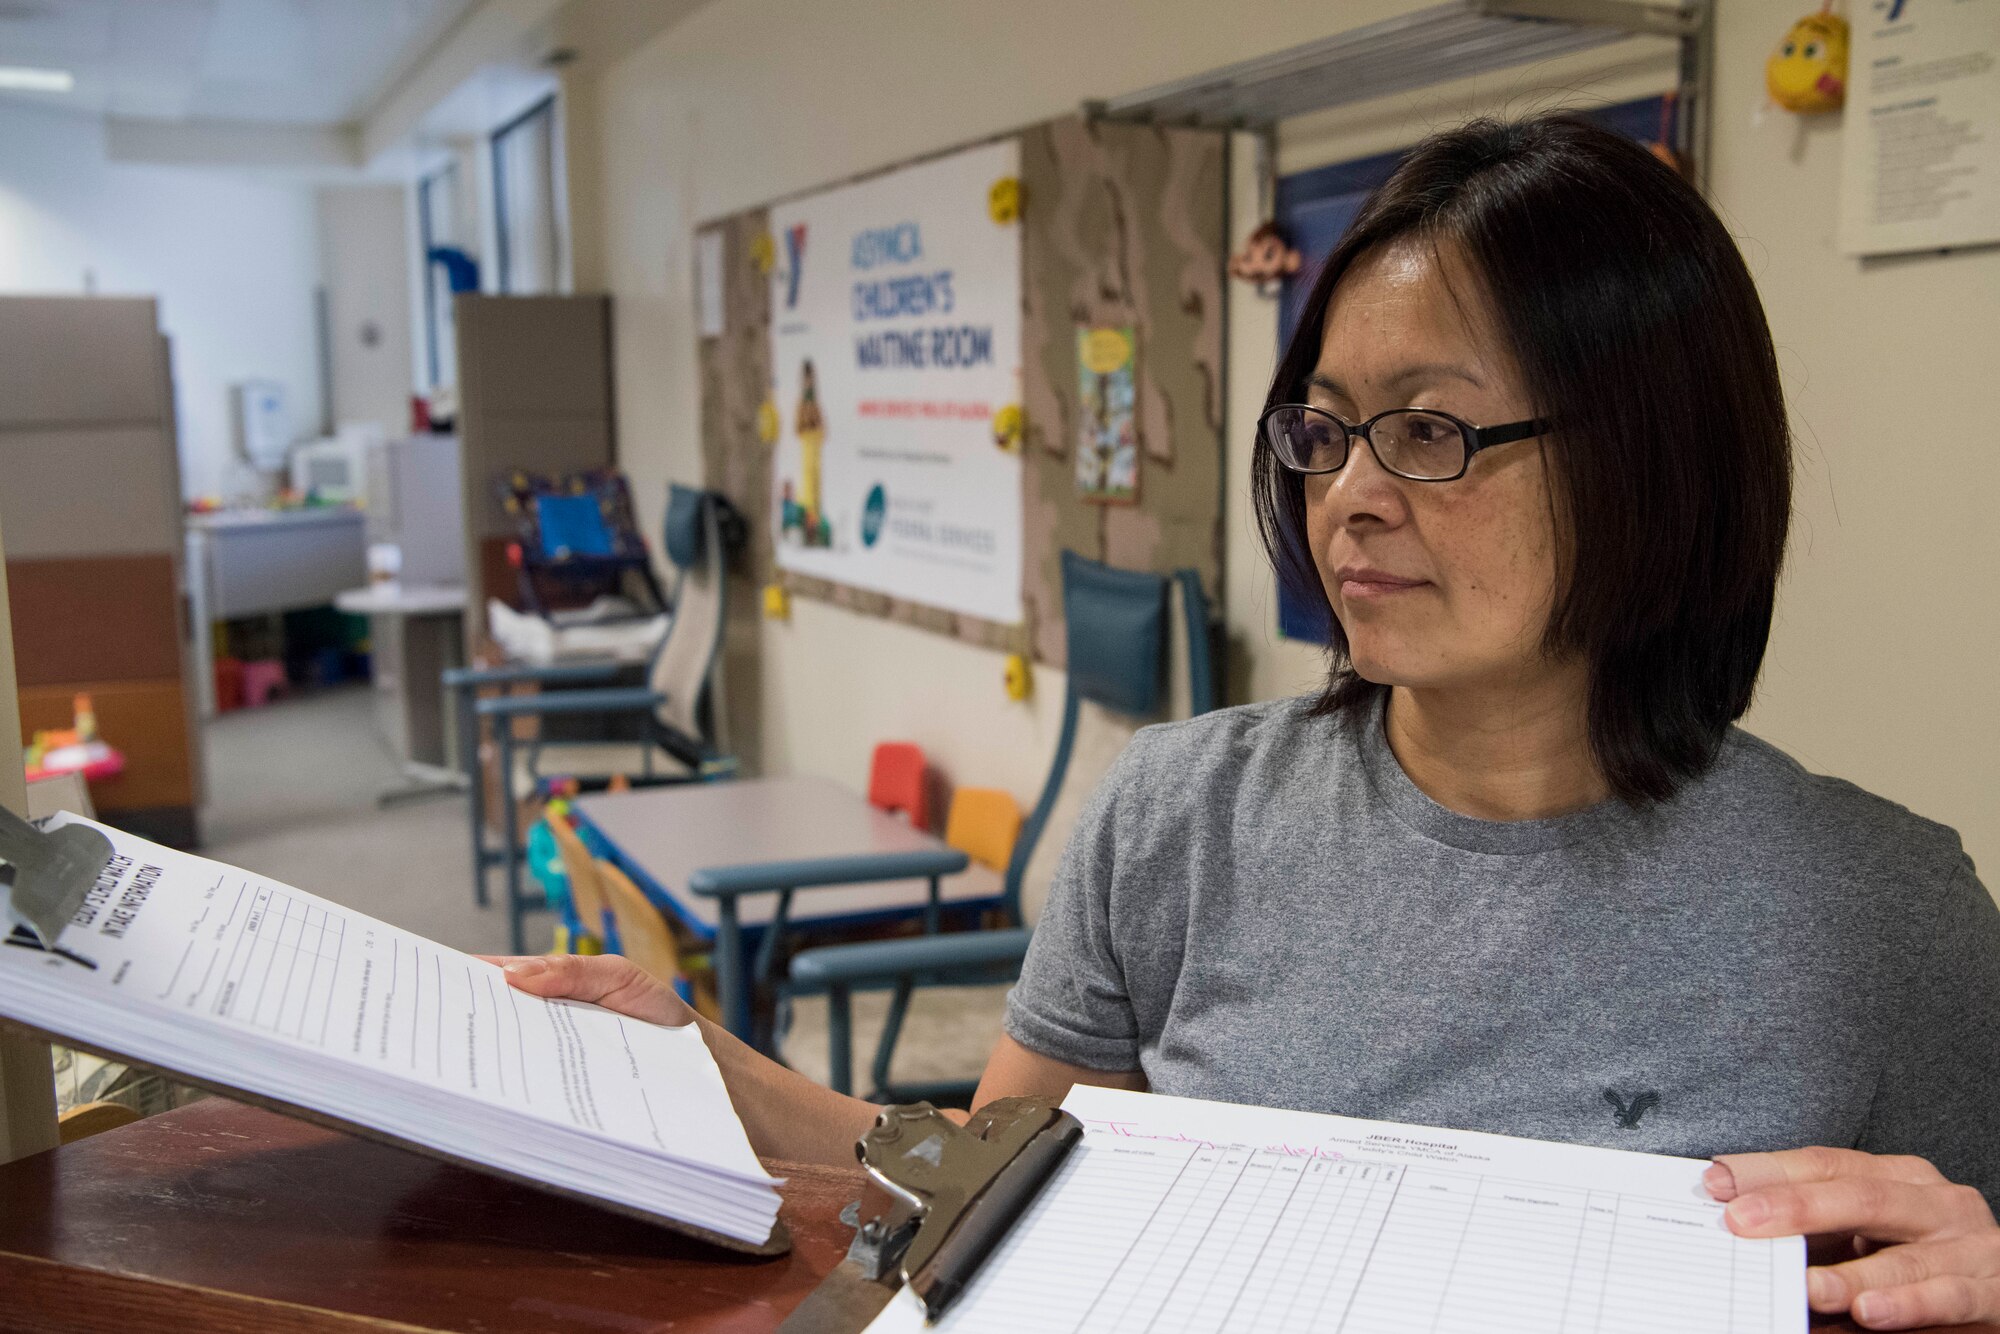 Misono Berry, a Children’s Waiting Room child specialist, prepares registration forms and sign-in logs for the Children’s Waiting Room at Joint Base Elmendorf-Richardson, Alaska, Oct. 18, 2018. The program offers parents with hospital appointments a safe, no-cost, temporary child care solution for children ages 6 weeks to 12 years old.